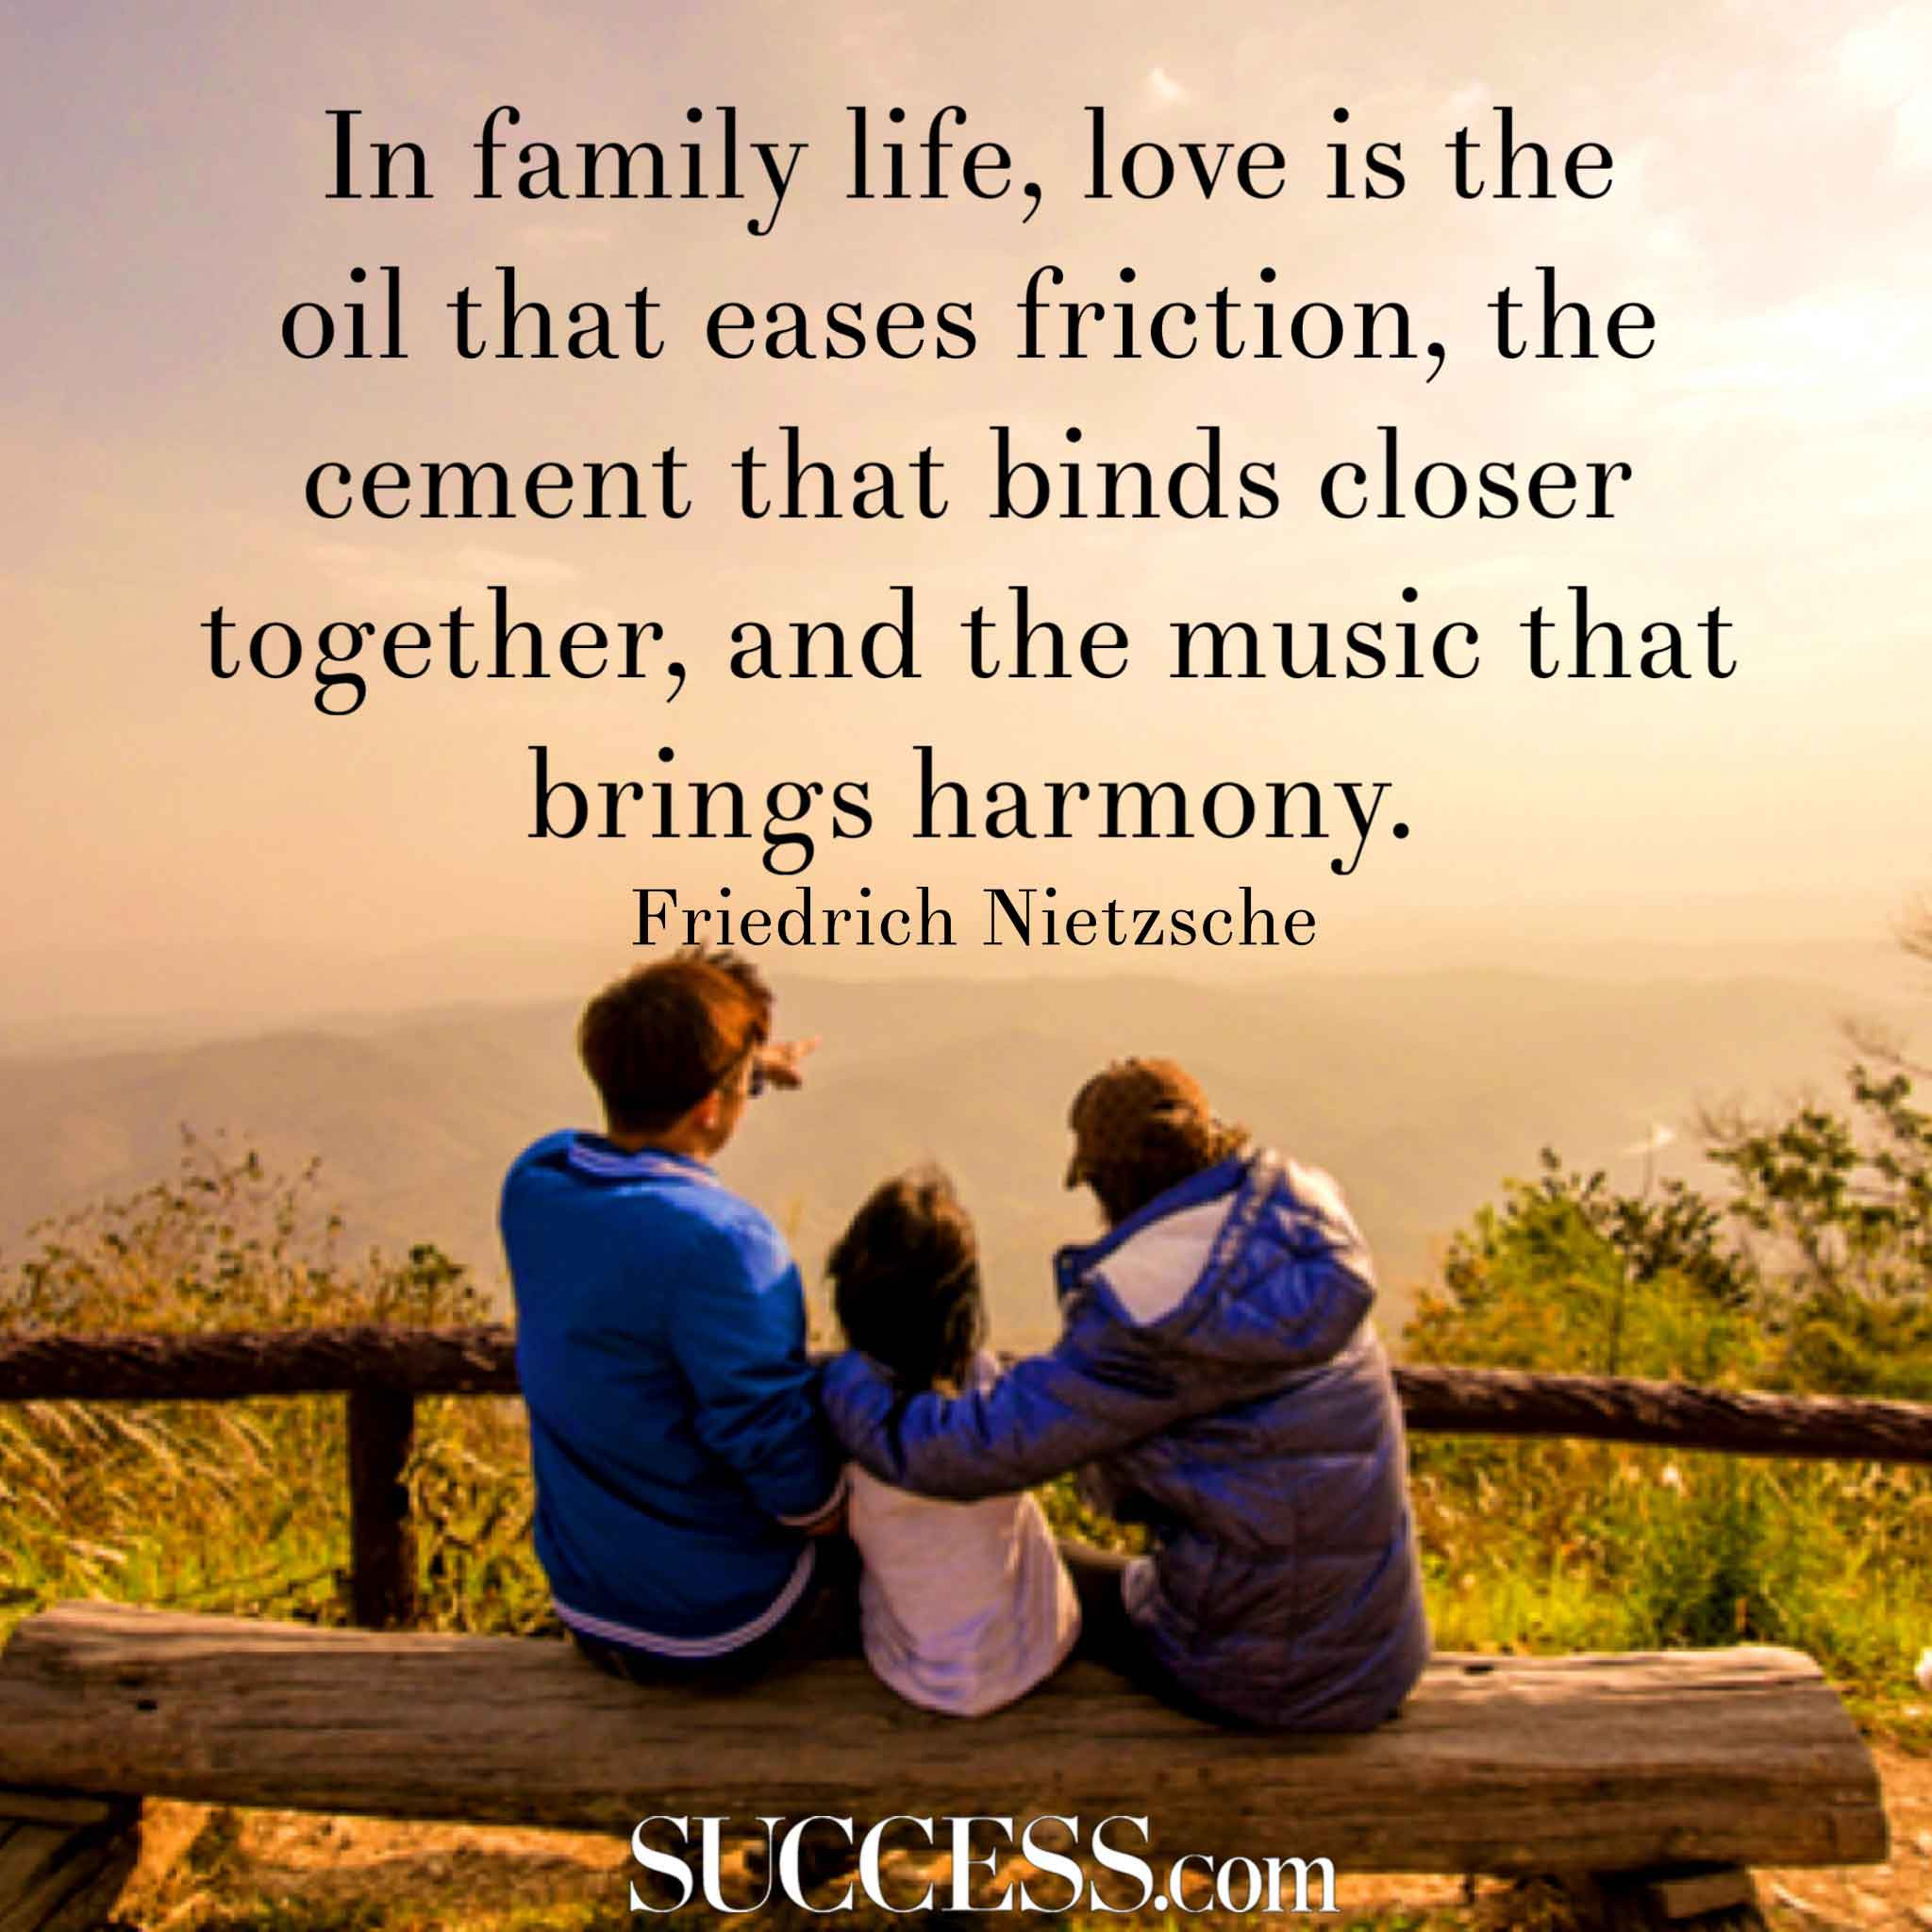 Quotes About Children Love
 55 Most Beautiful Family Quotes And Sayings